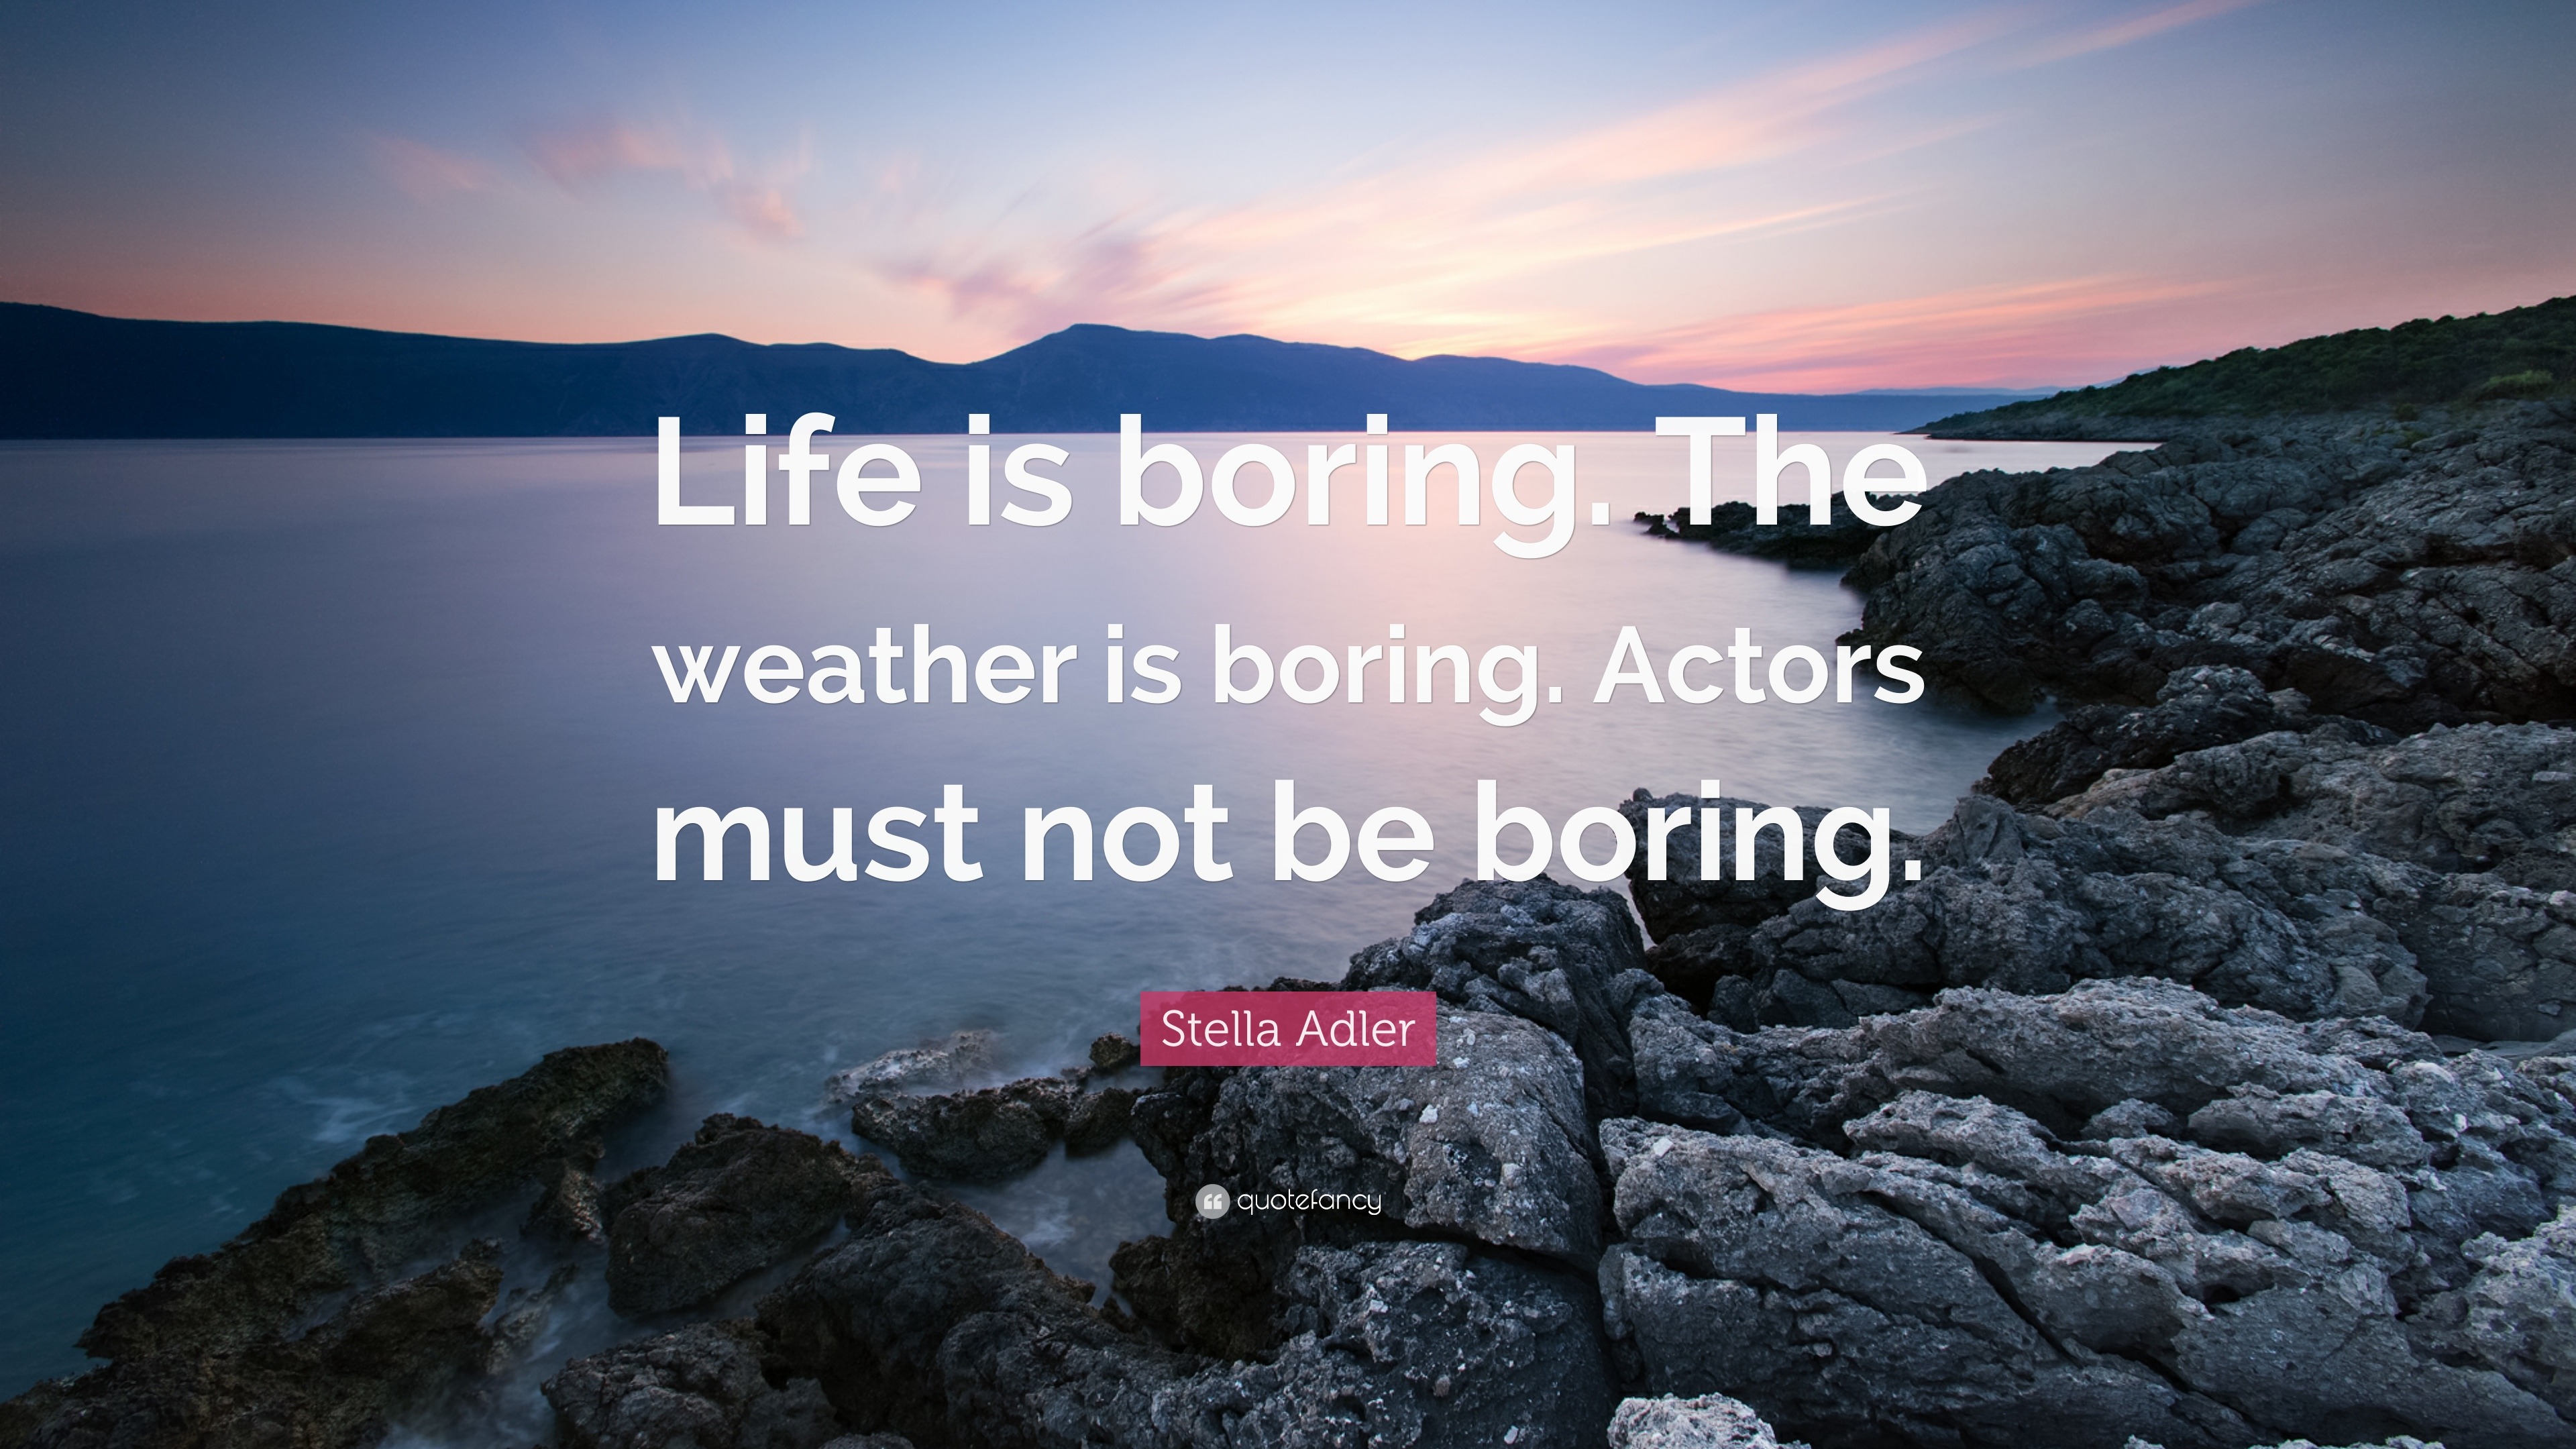 Stella Adler Quote: "Life is boring. The weather is boring ...